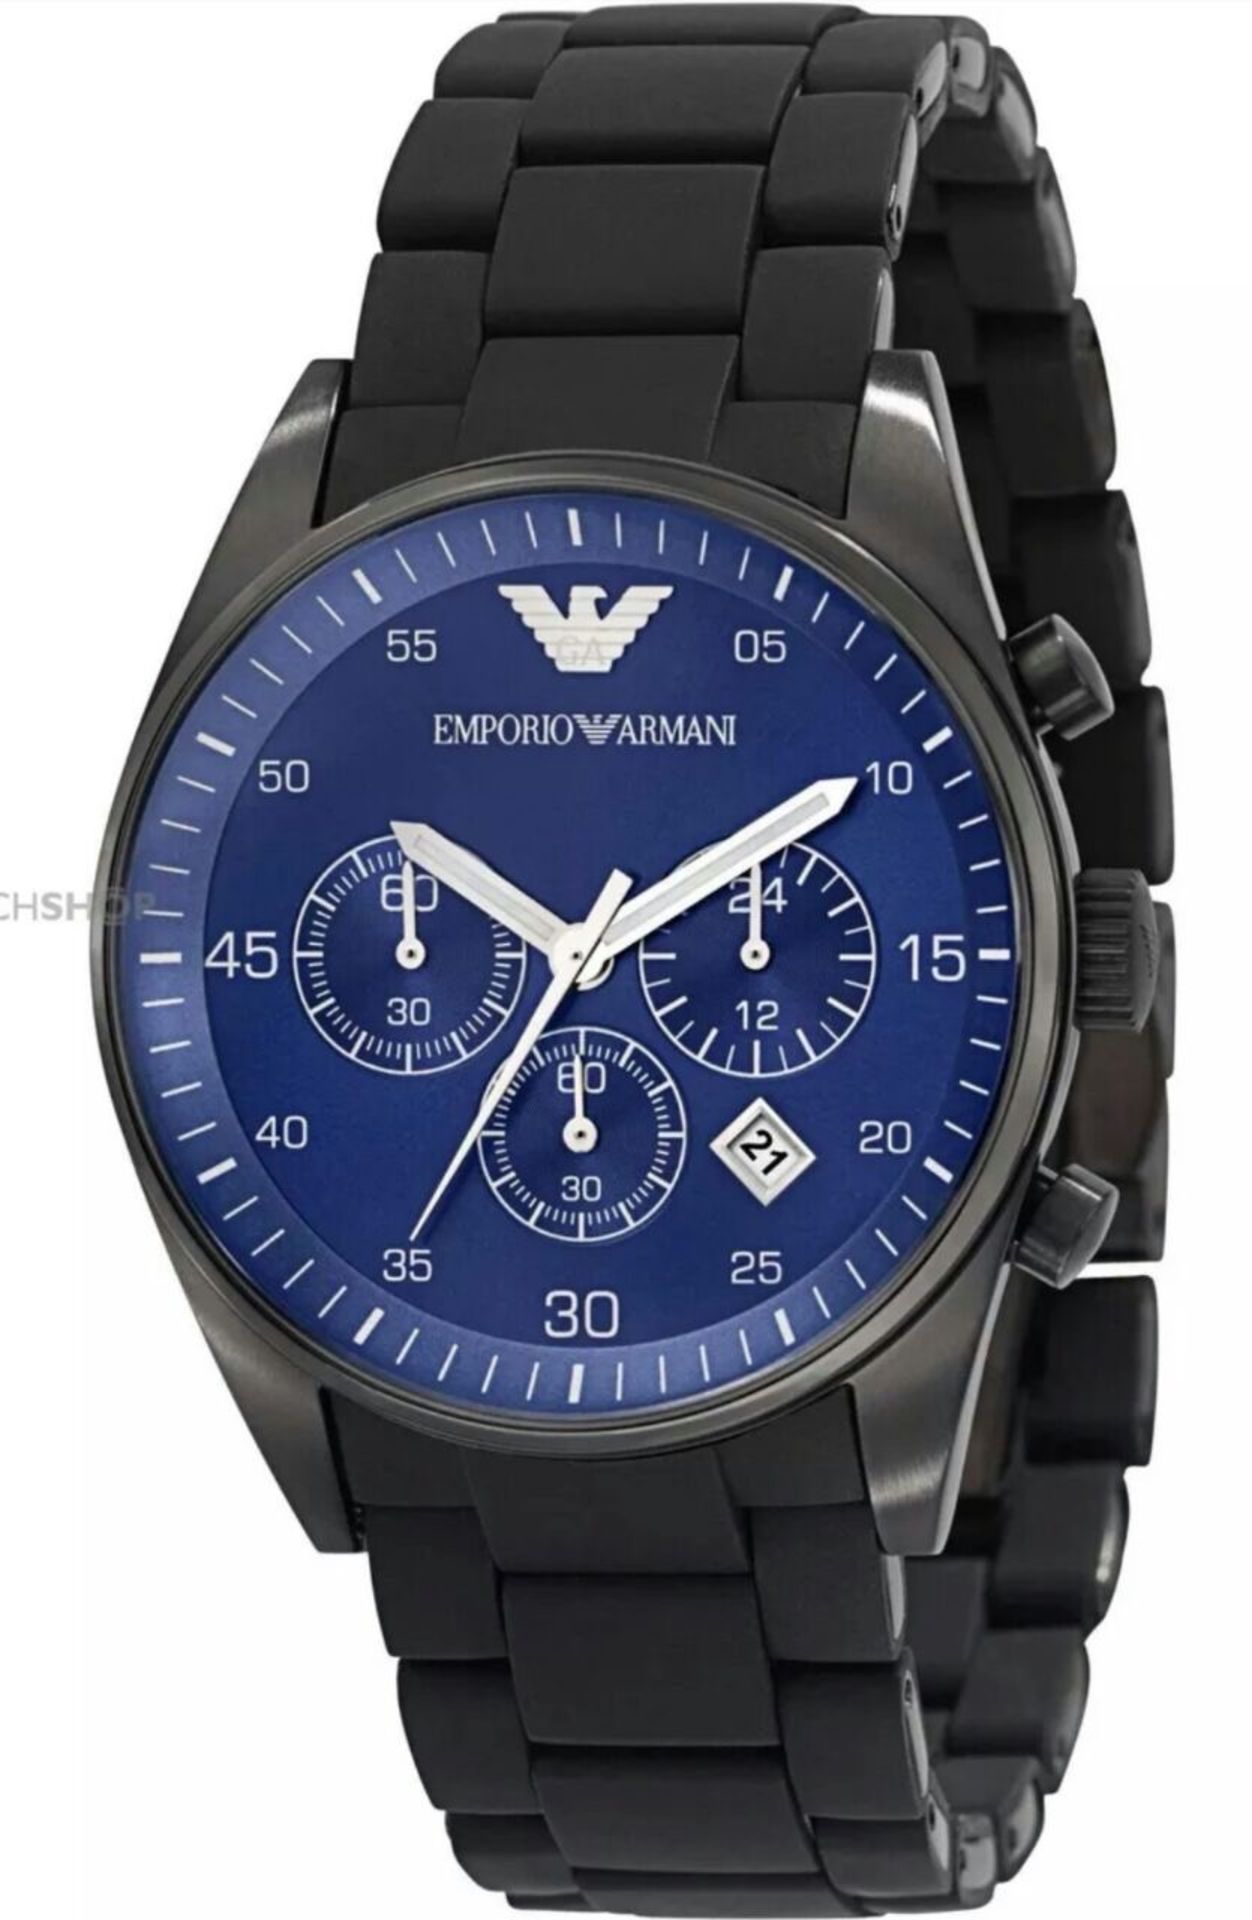 BRAND NEW EMPORIO ARMANI AR5921, GENTS SPORTIVO CHRONOGRAPH WATCH, BLUE FACE AND BLACK SILICONE OVER